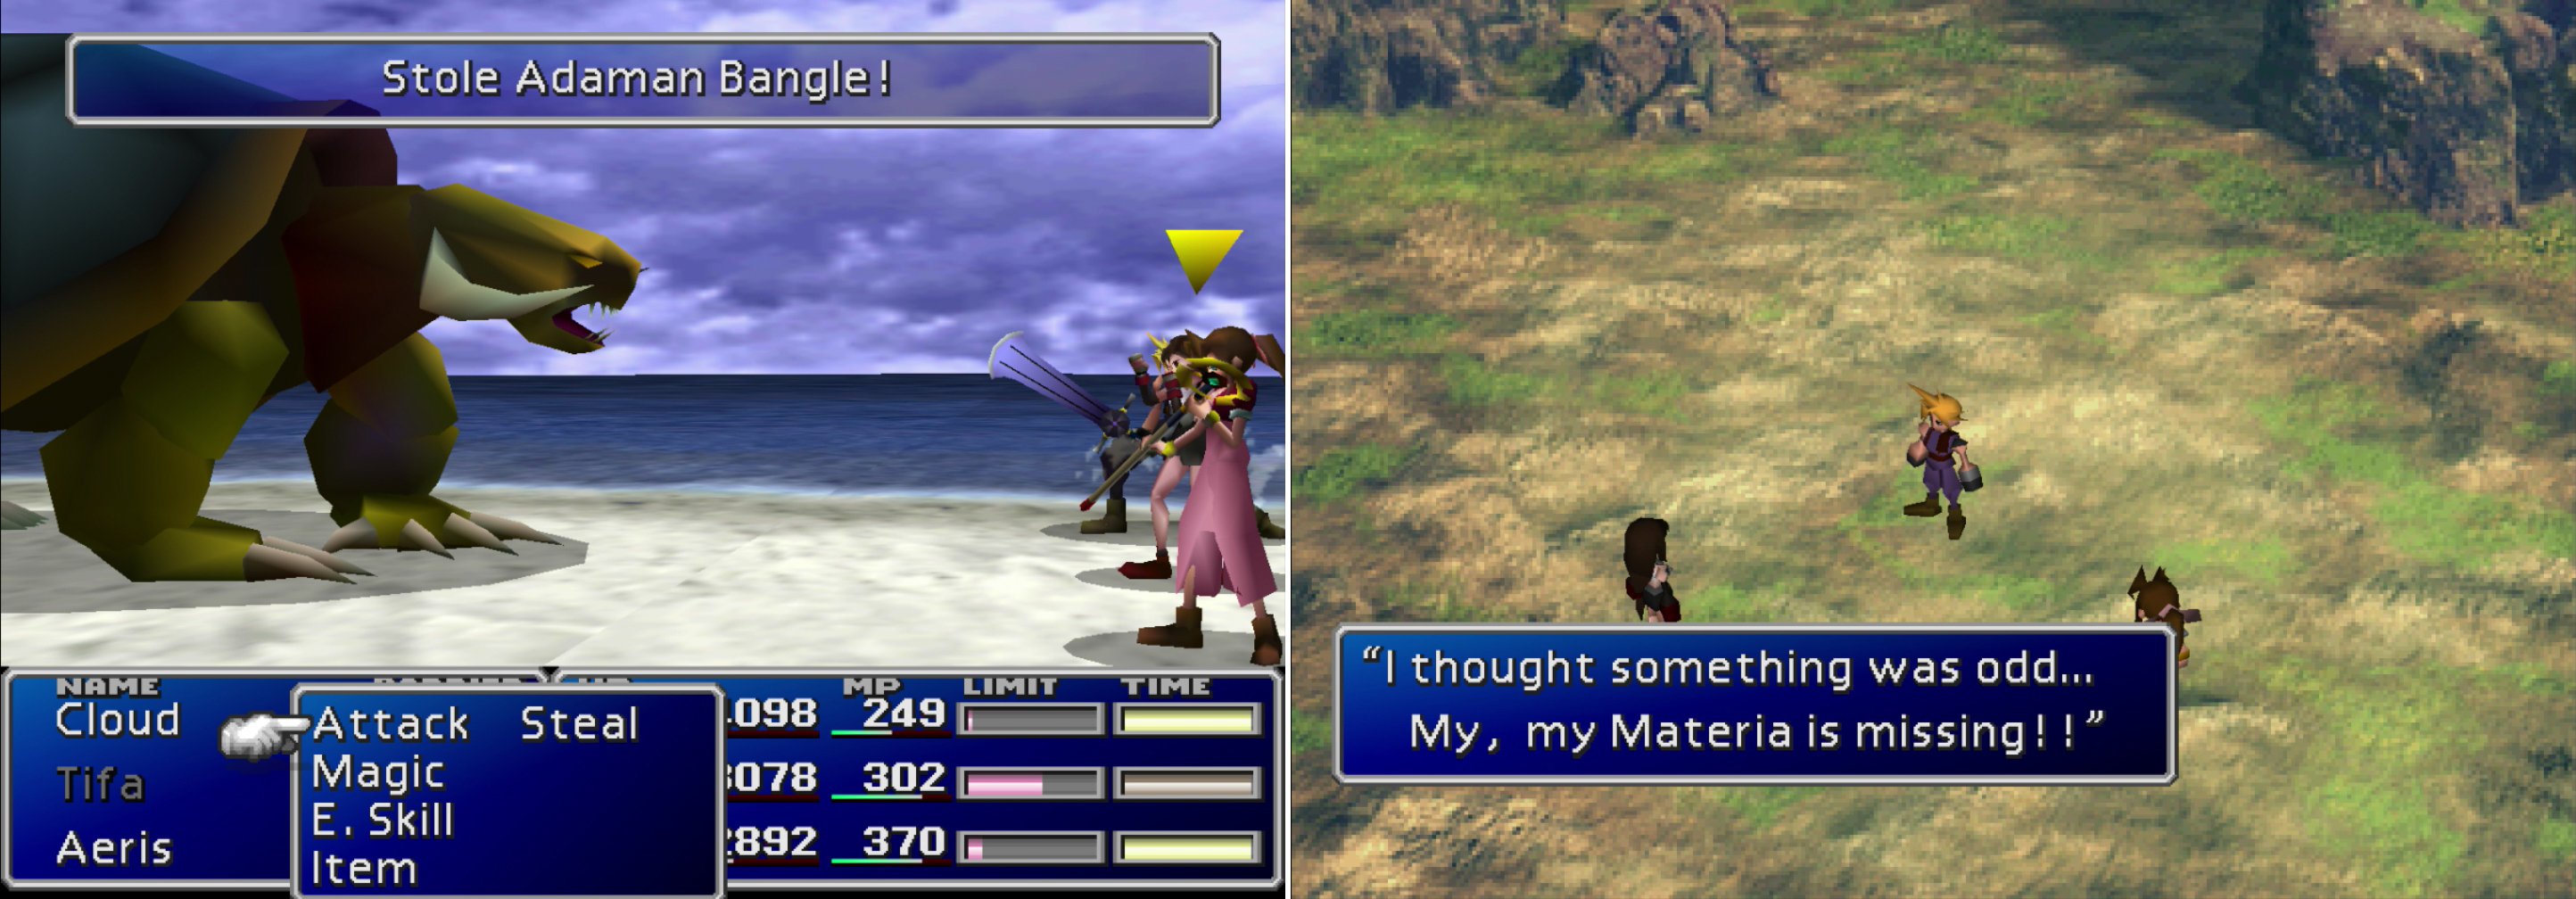 Learn the “Death Force” Enemy Skill from the Adamantaimai that prowl along Wutai’s beaches (left). After encountering some Shinra troops, the party will discover that Yuffie made off with some of their belongings (right).